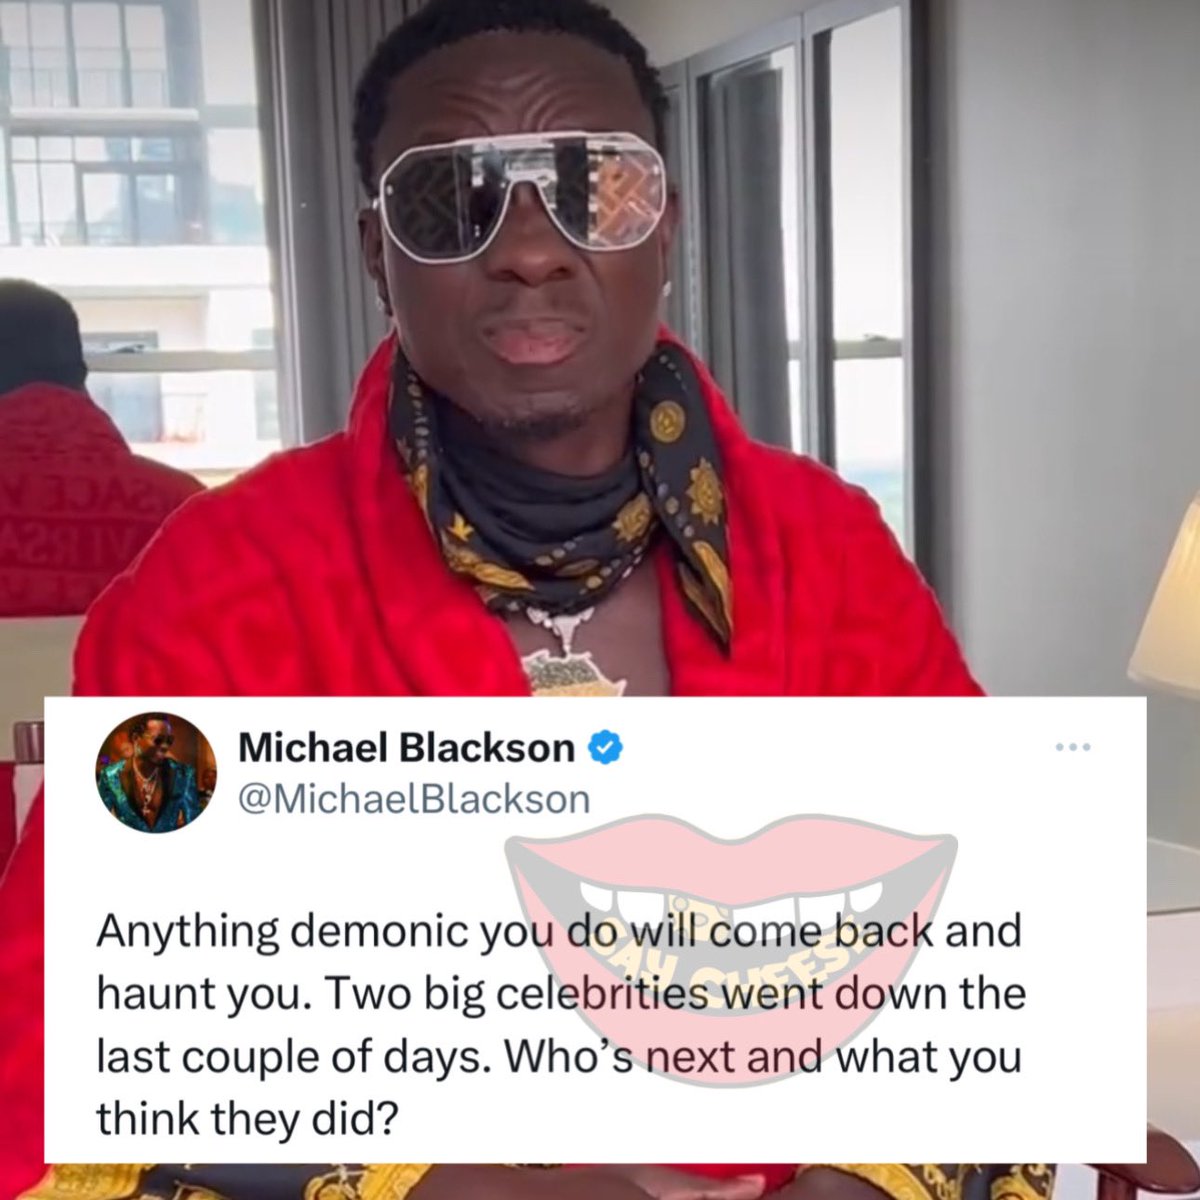 Michael Blackson speaks: “Anything demonic you do will come back and haunt you”